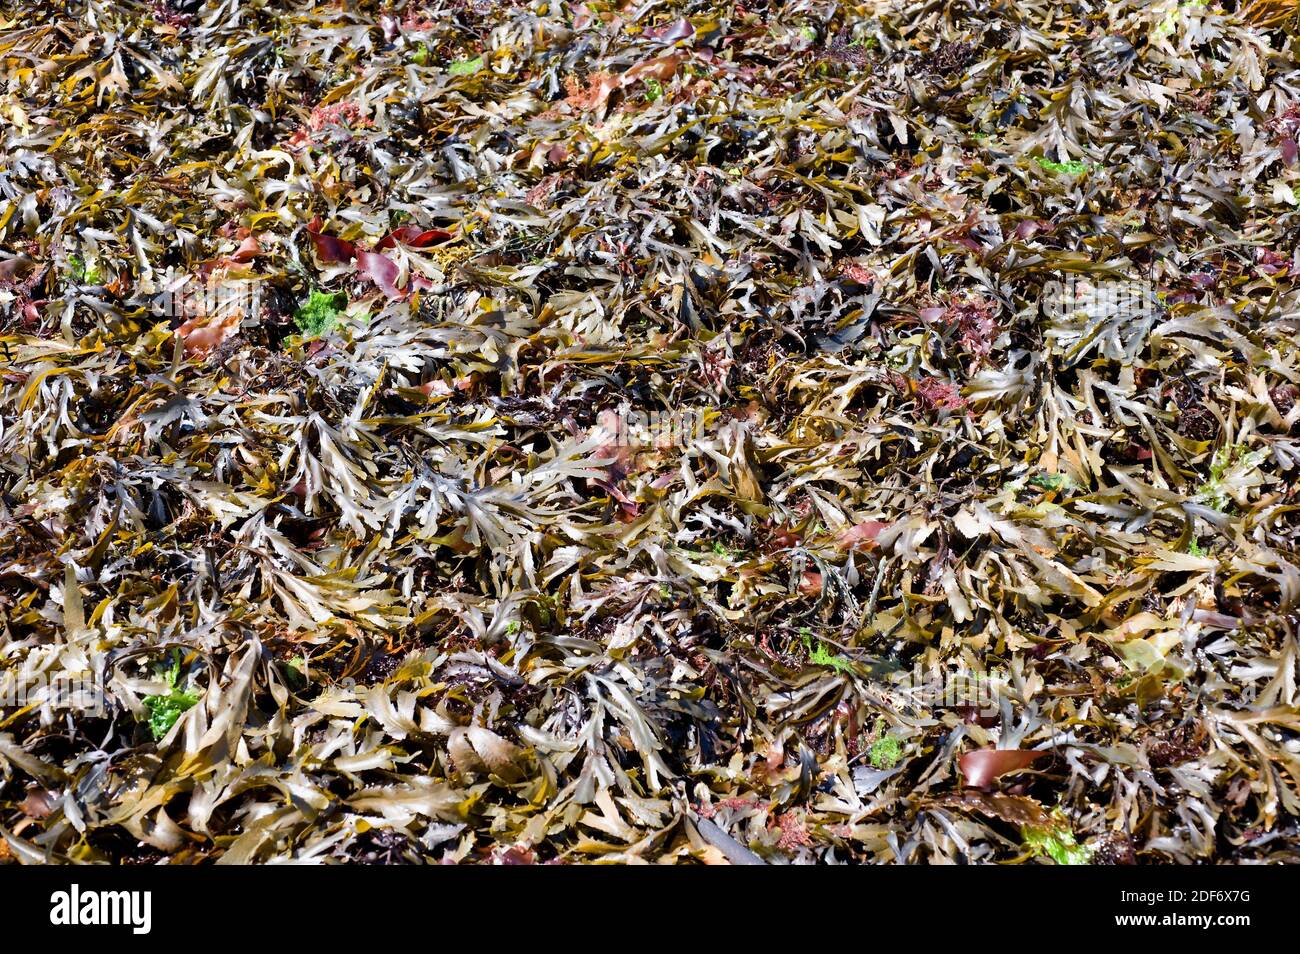 Serrated wrack (Fucus serratus) is a brown alga native to Atlantic Ocean. This photo was taken in Brittany coast, France. Stock Photo